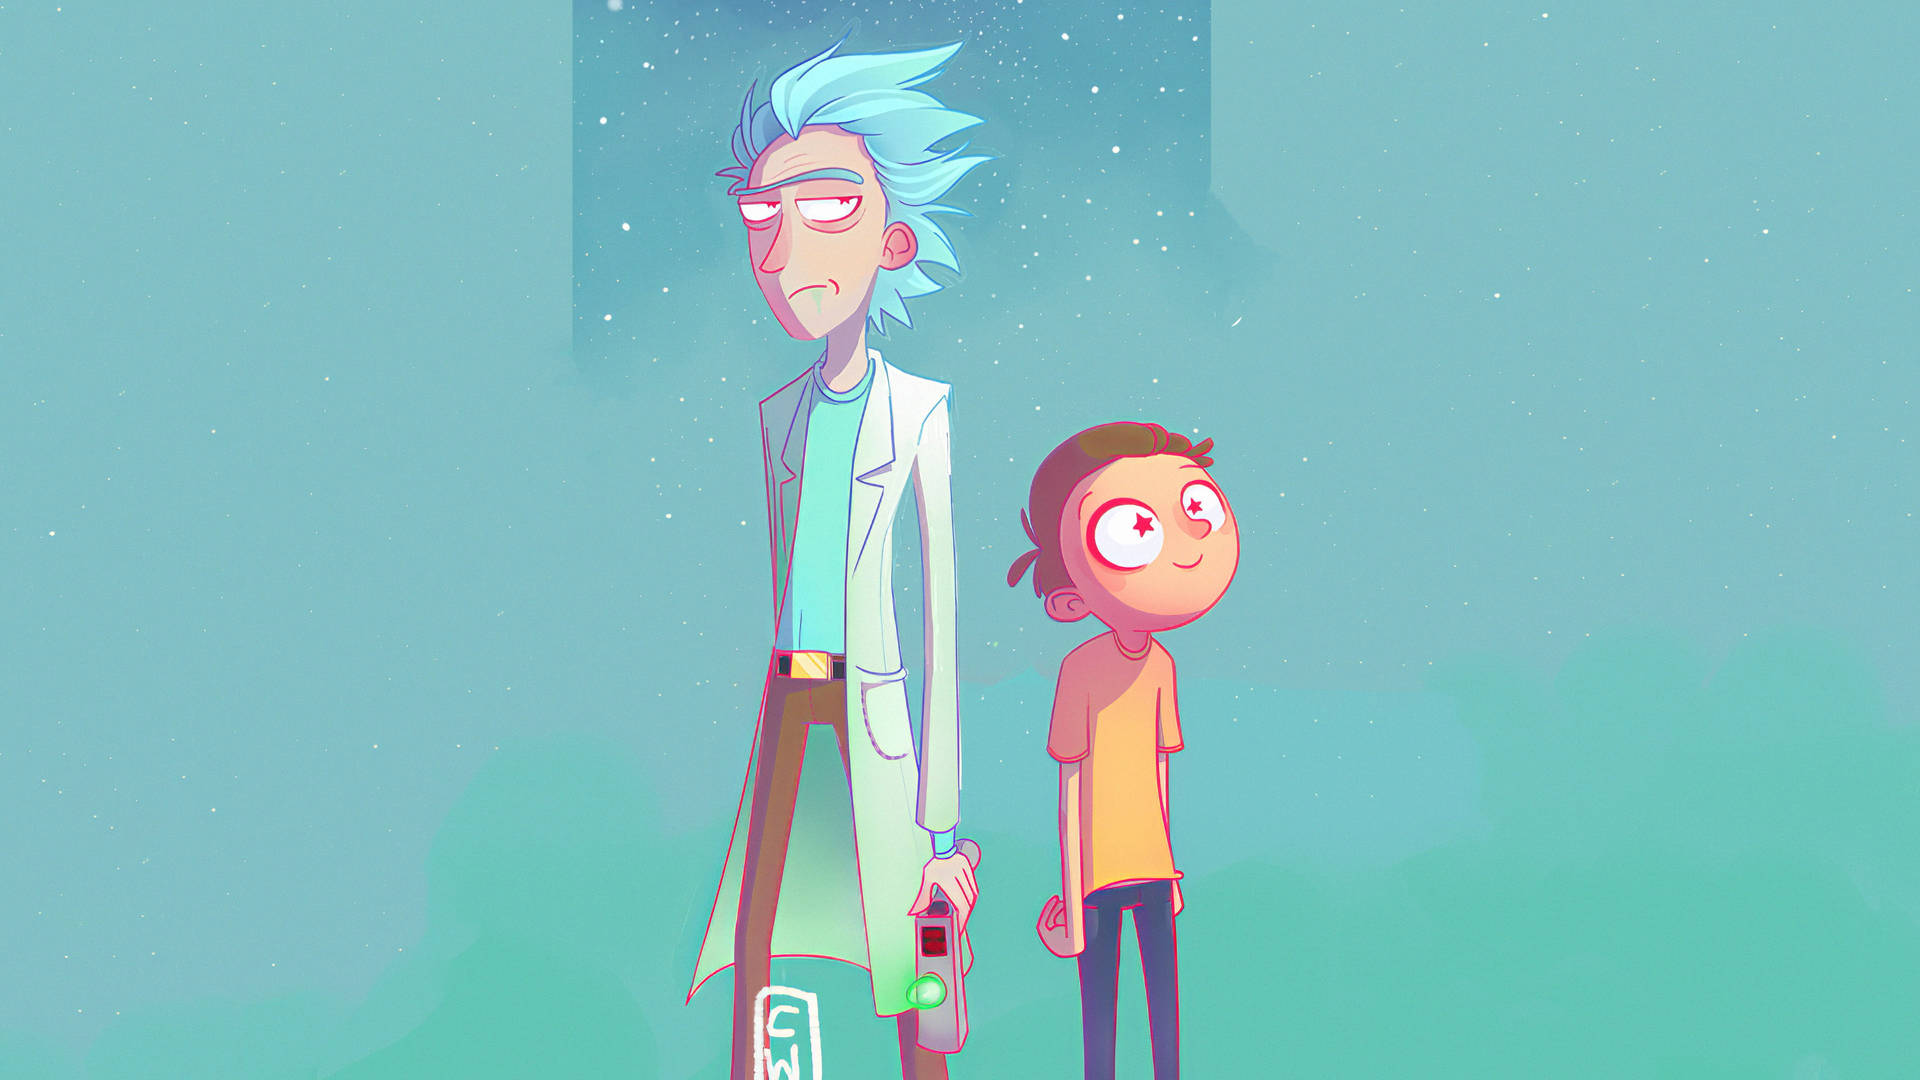 Free Rick Wallpaper Downloads, [600+] Rick Wallpapers for FREE | Wallpapers .com